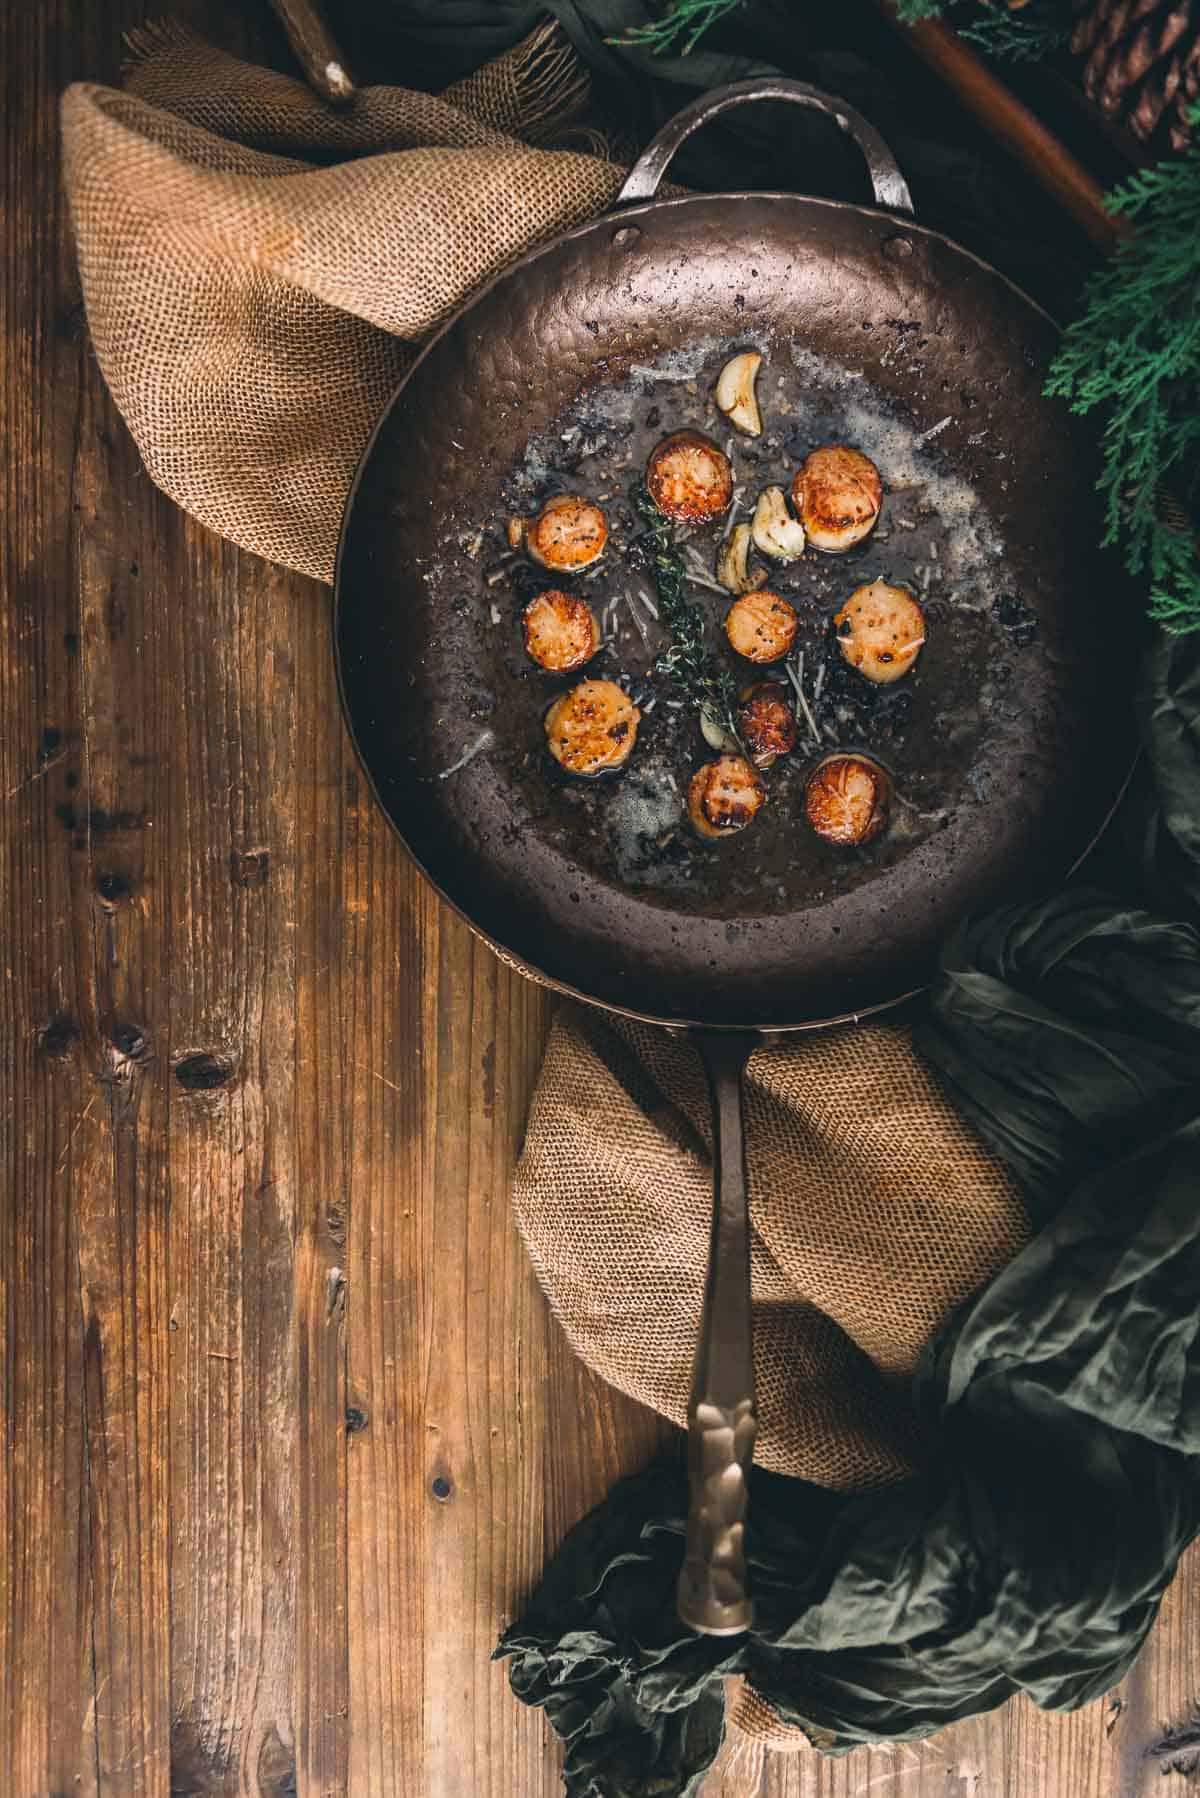 A frying pan with scallops and pine cones on a wooden table.